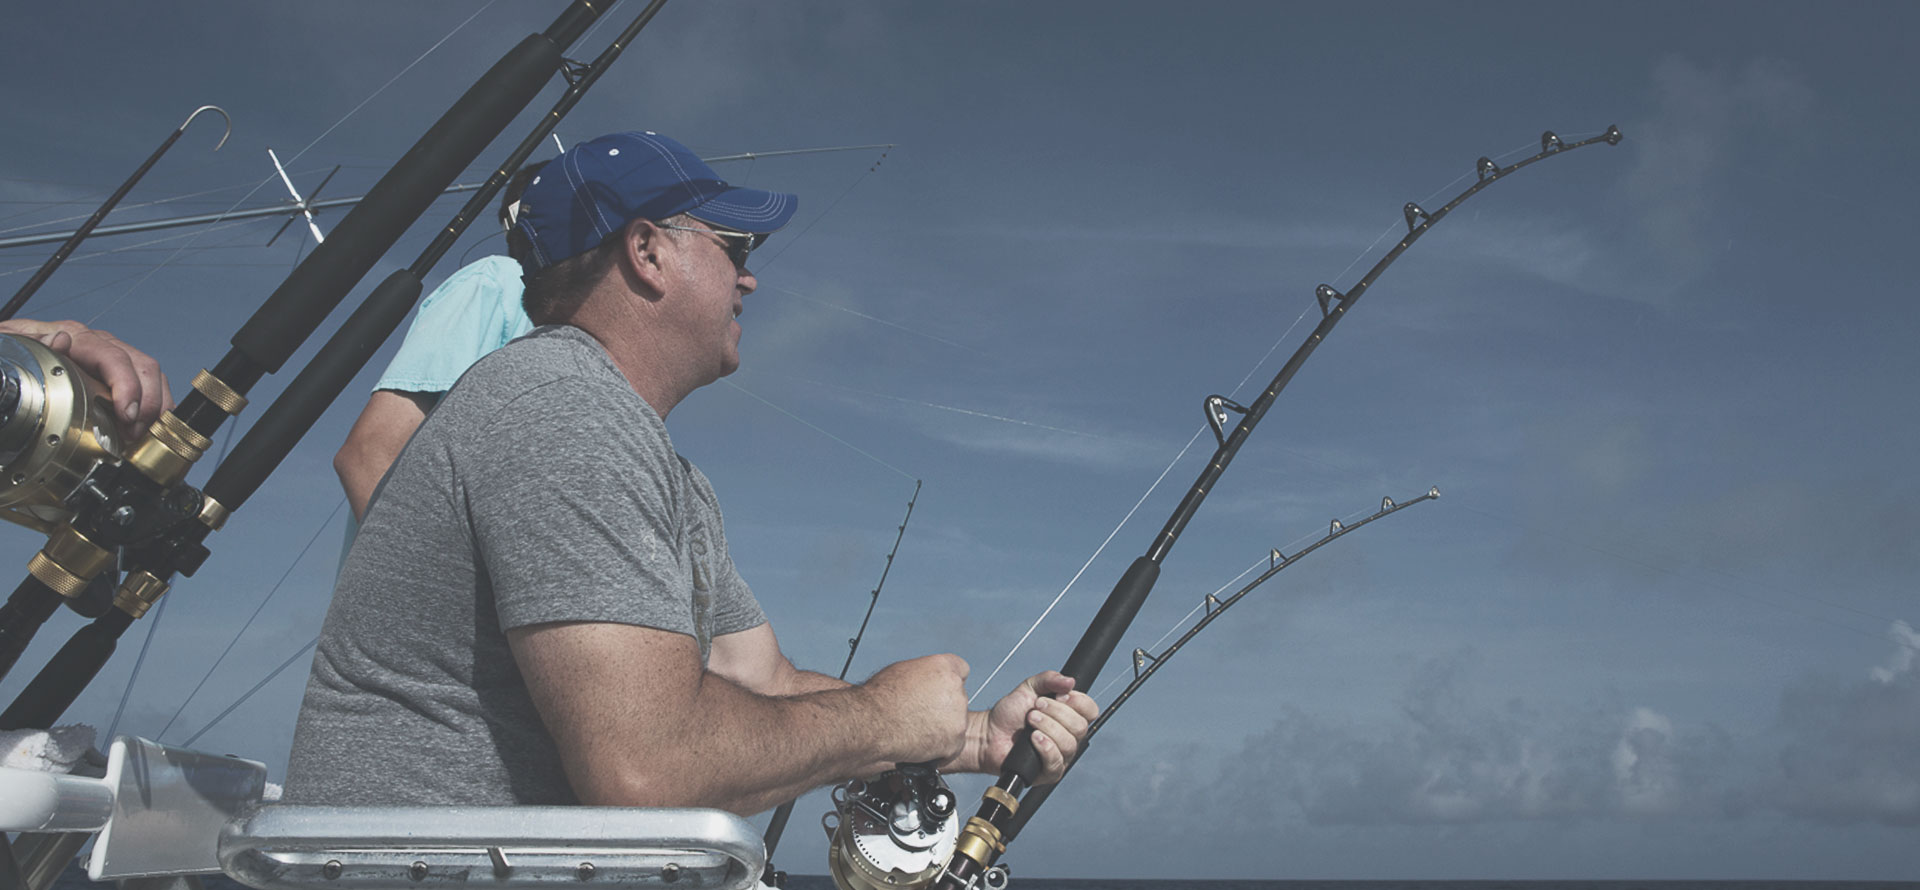 Available Fishing Charters - Book a J-Hook Fishing Charter St Augustine FL fighting chair